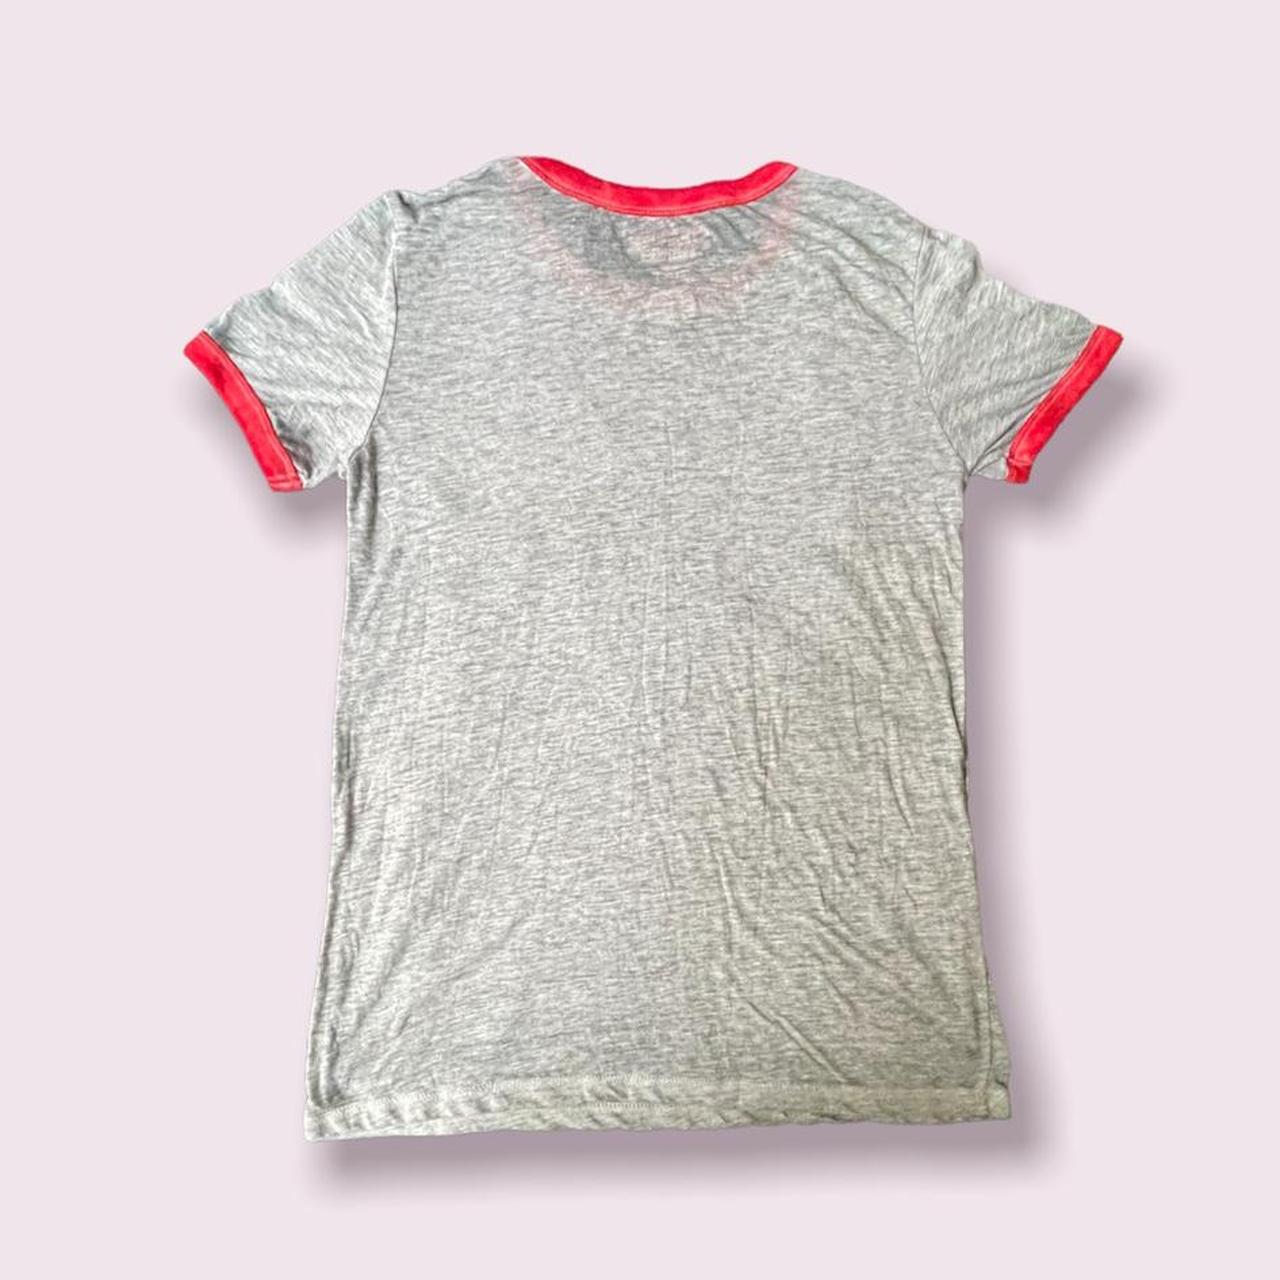 Adolescent Clothing Women's Grey and Red T-shirt (2)